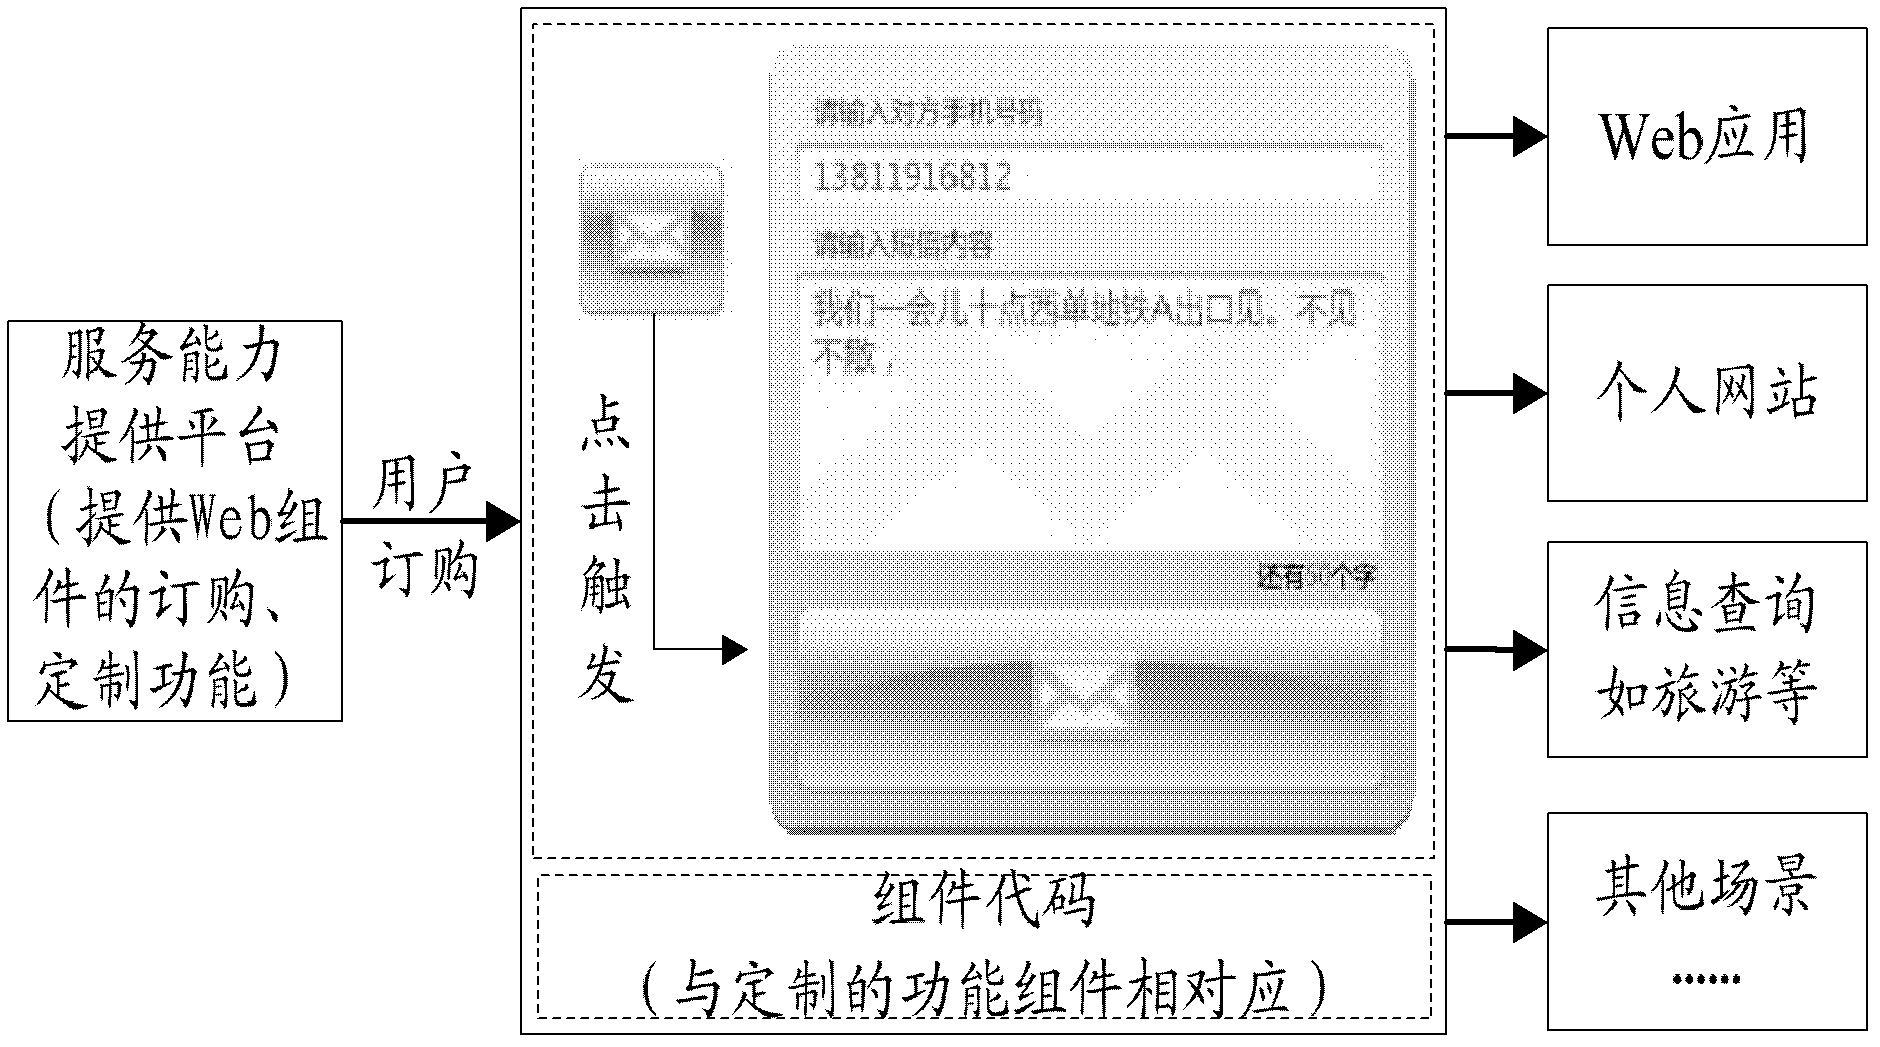 SMS sending service system based on web Element mechanism and its working method